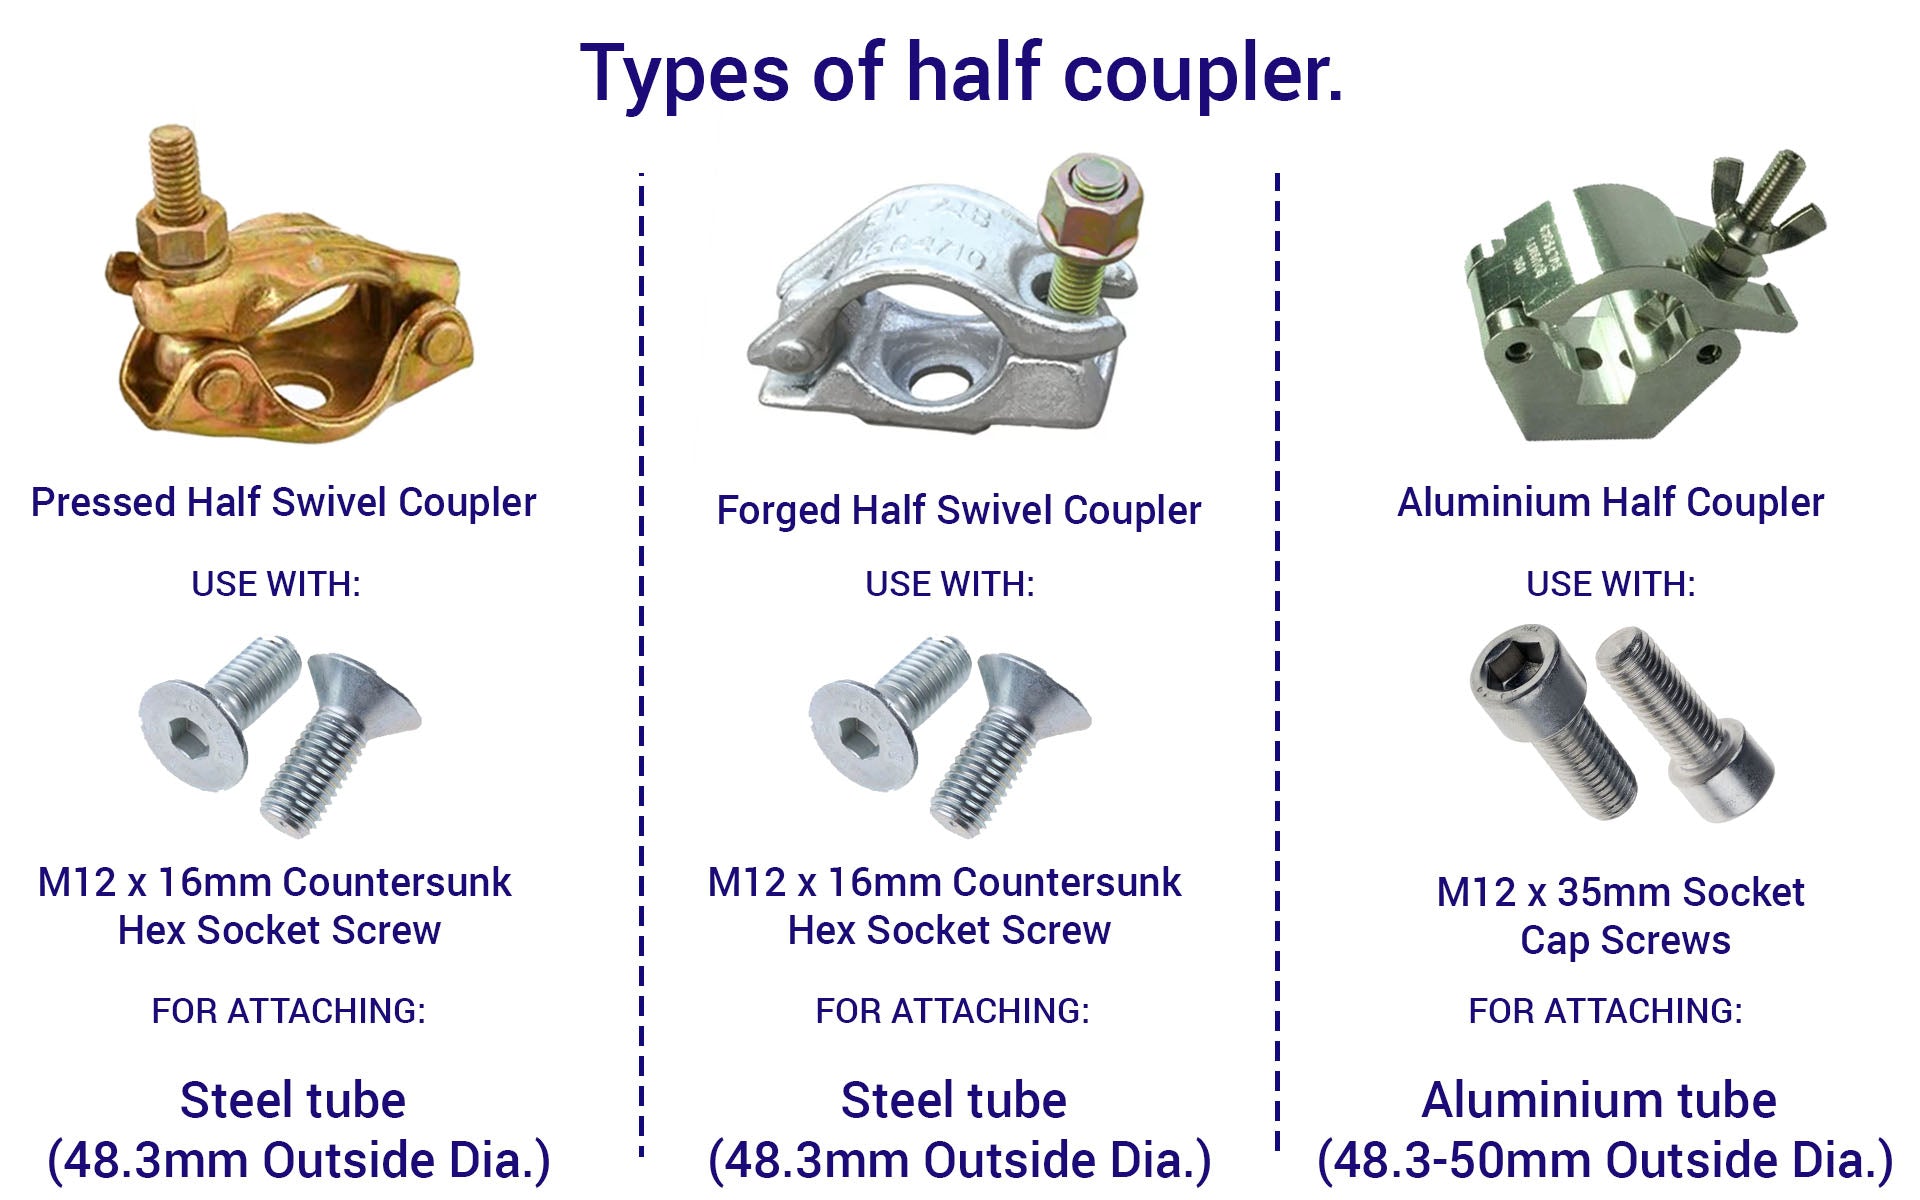 Types of half couplers